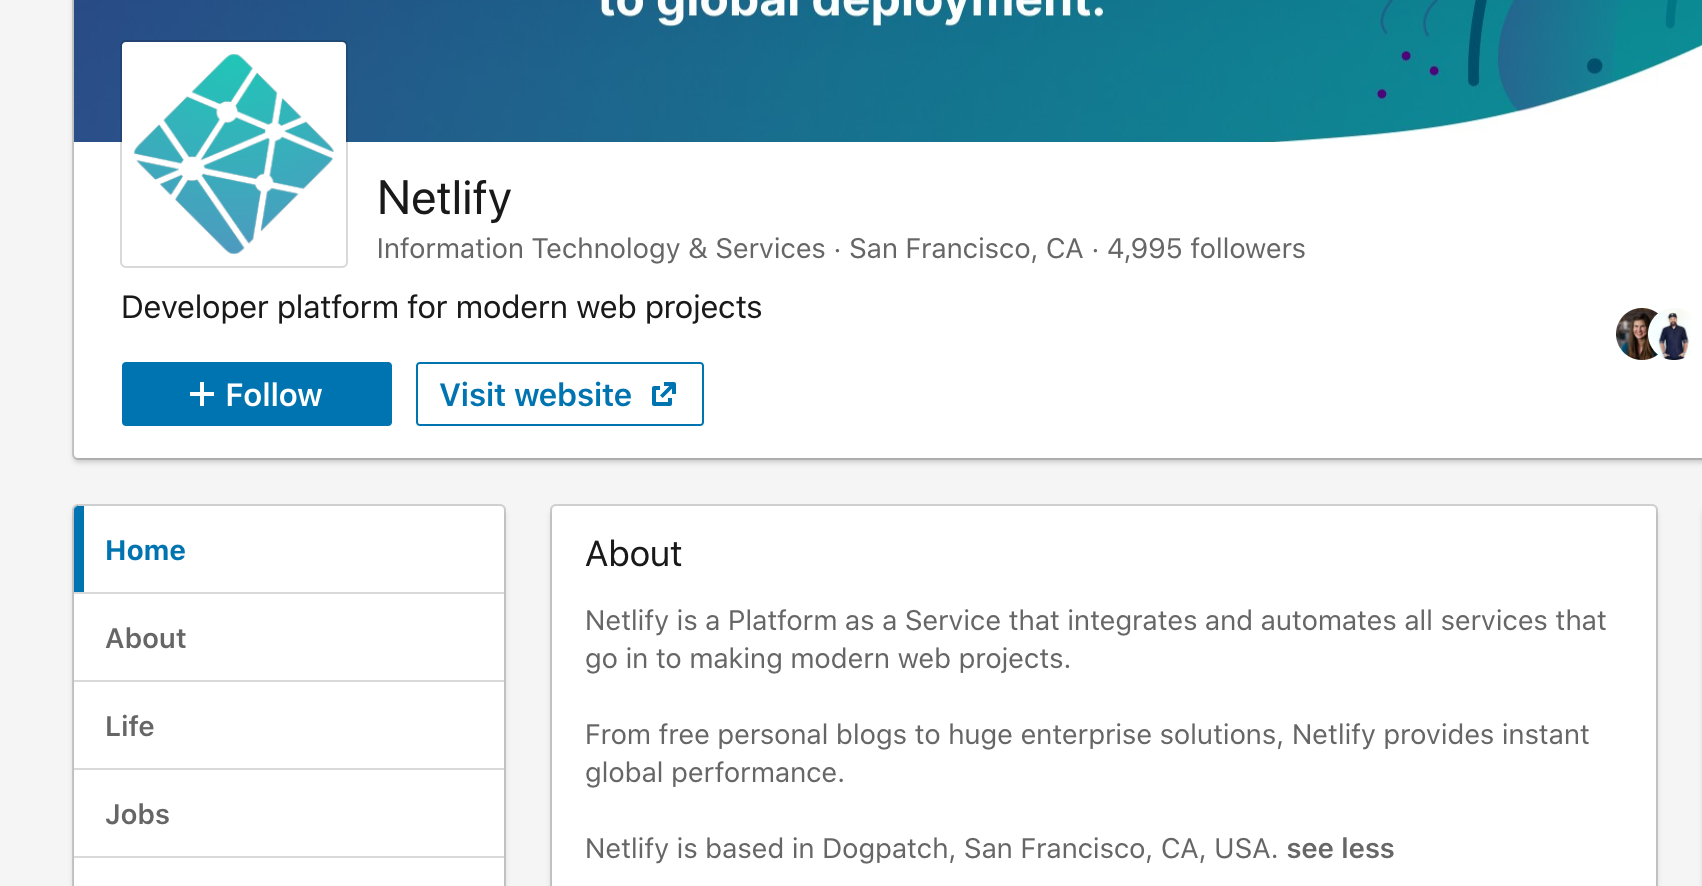 The Netlify company page on LinkedIn describes it as both a Developer Platform and a Platform as a Service, and does not mention Jamstack.